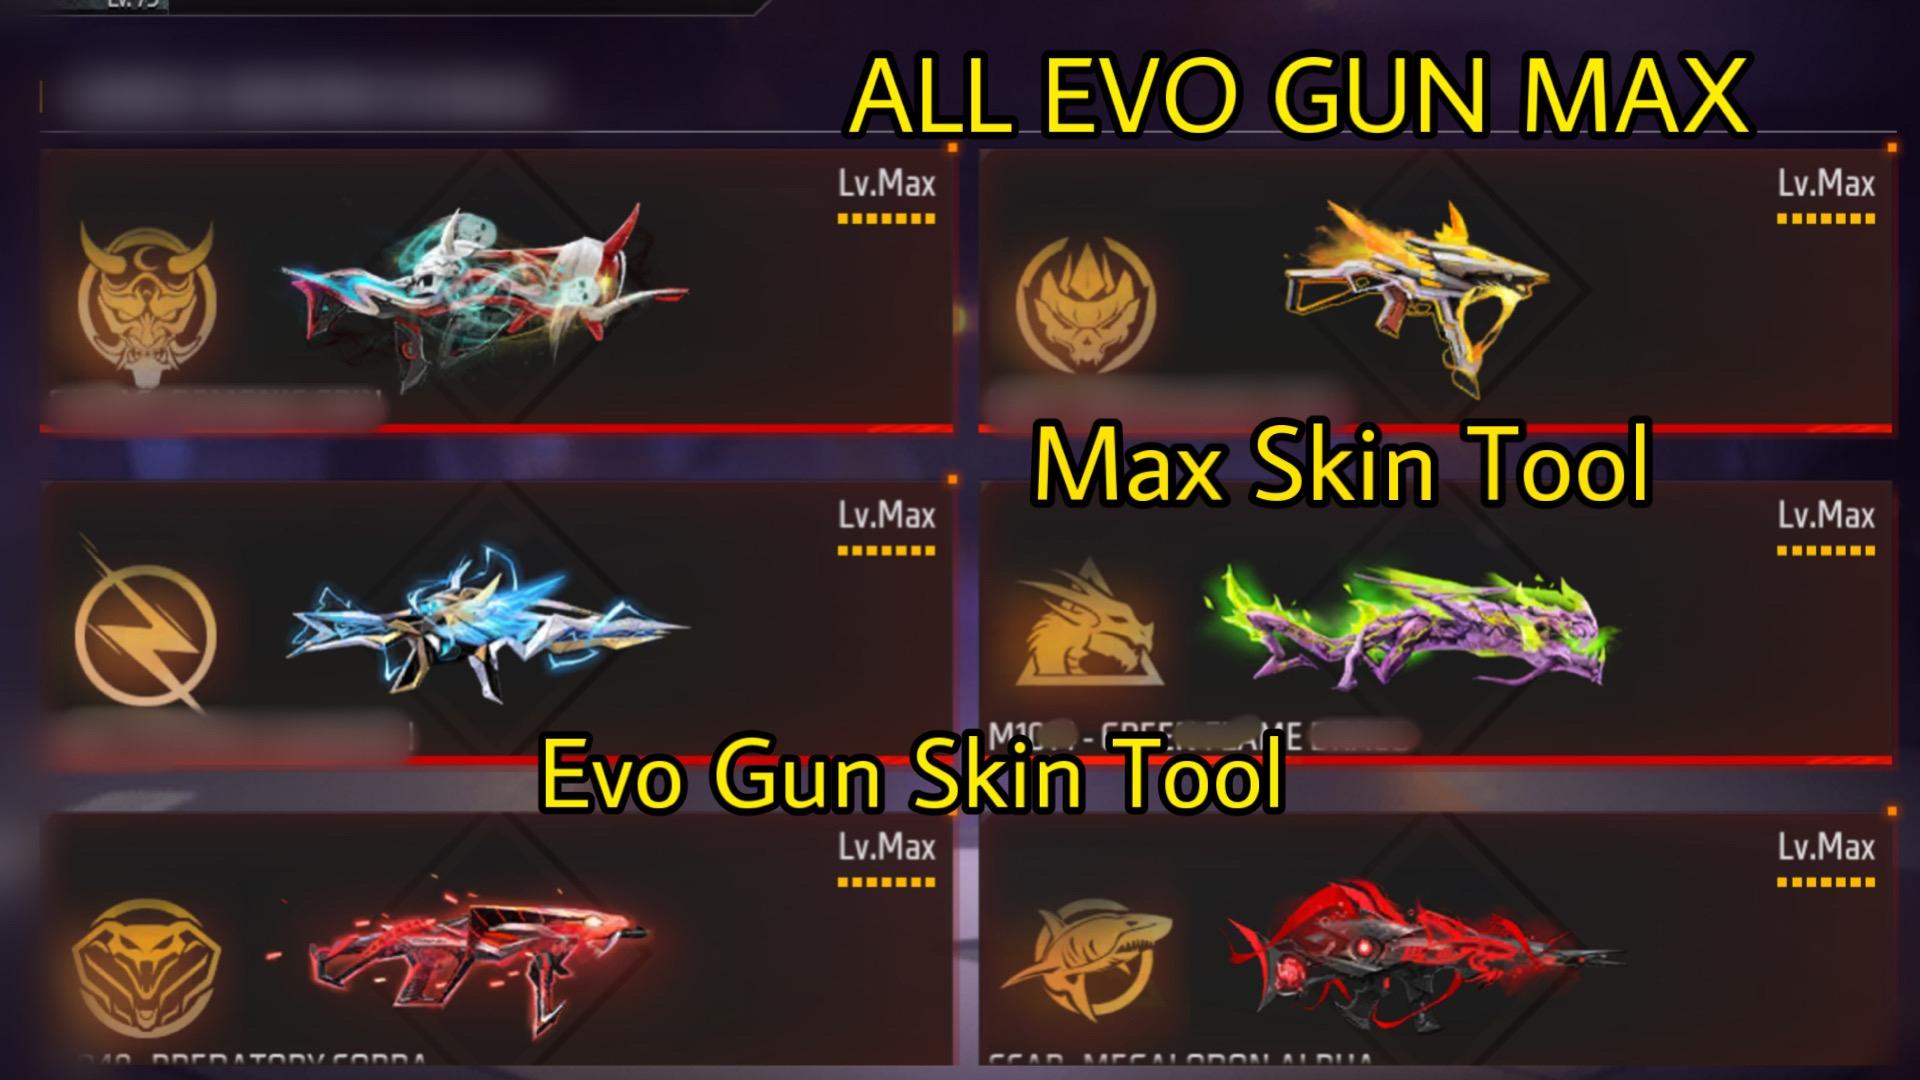 Download Evo Gun Skin Tool FF Max android on PC